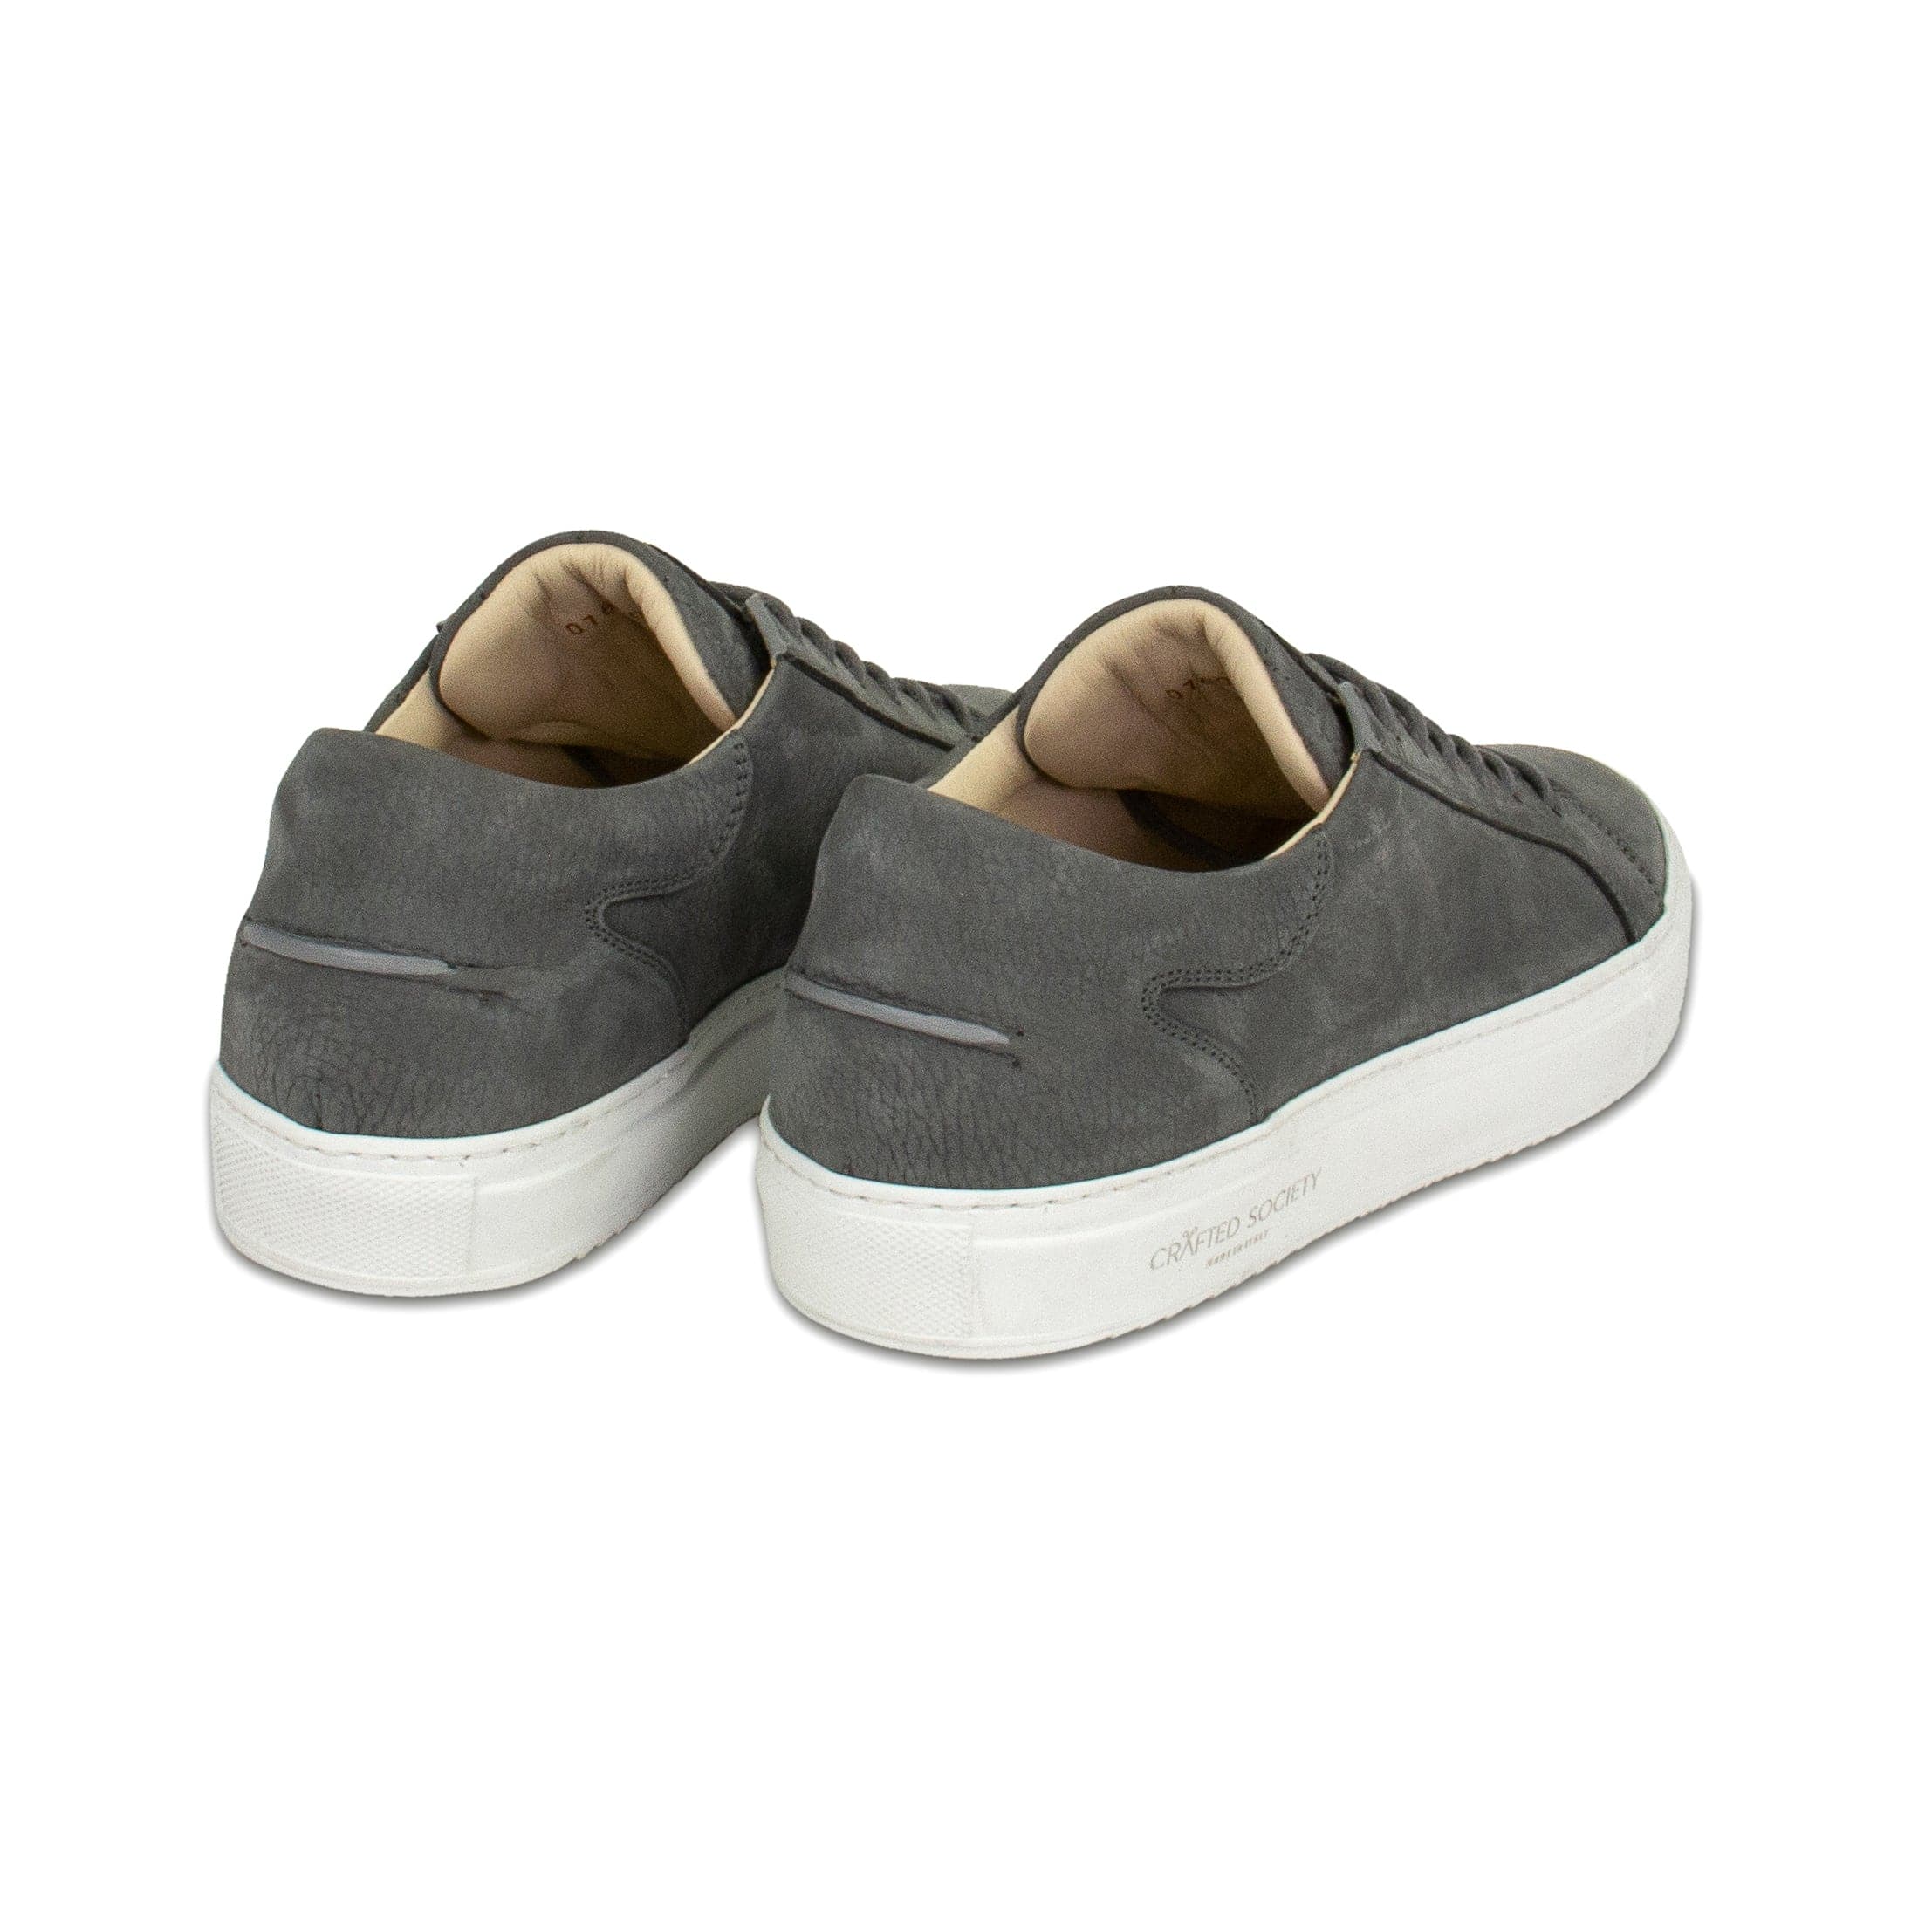 Mario Low Refined Sneaker | Dark Grey Nubuck | White Outsole | Made in Italy | size 40